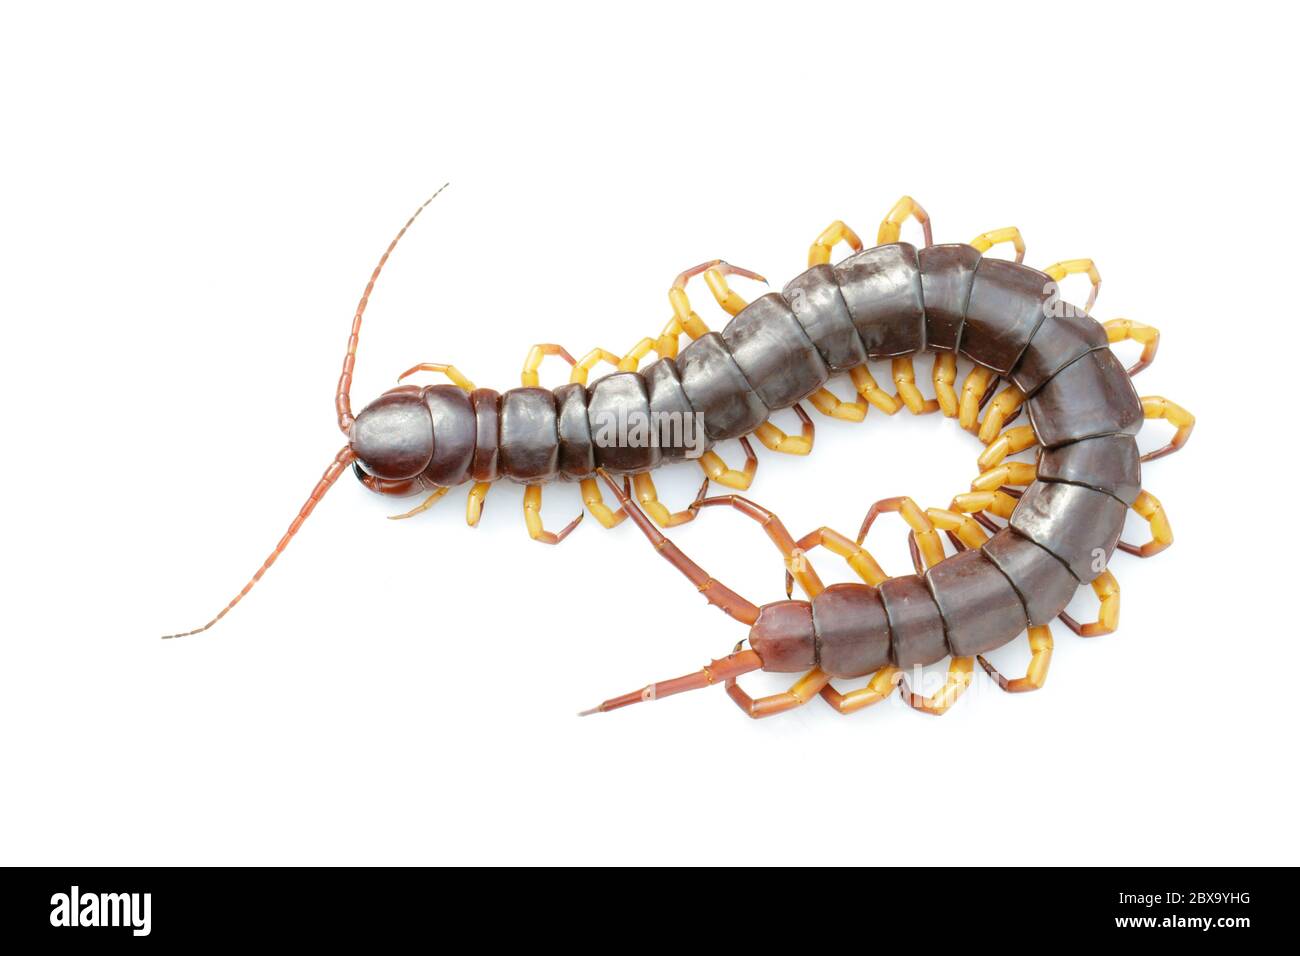 Image of centipedes or chilopoda isolated on white background. Animal. Poisonous animals. Stock Photo